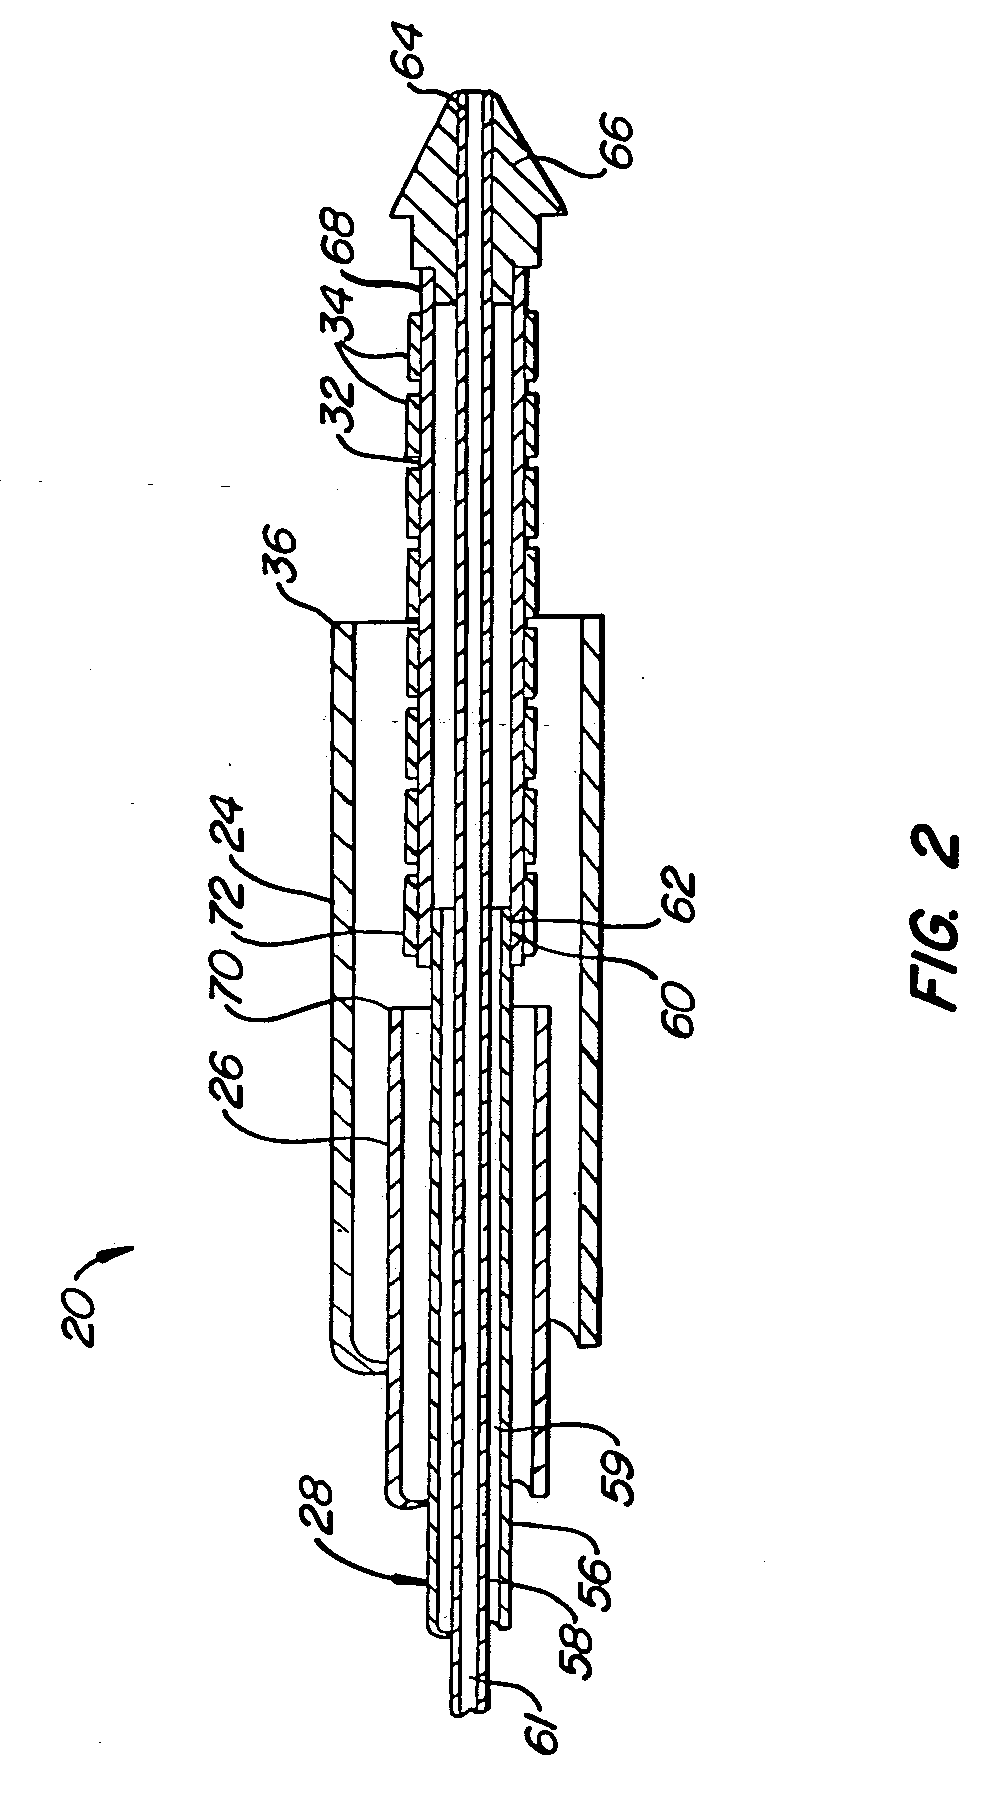 Stent deployment systems and methods